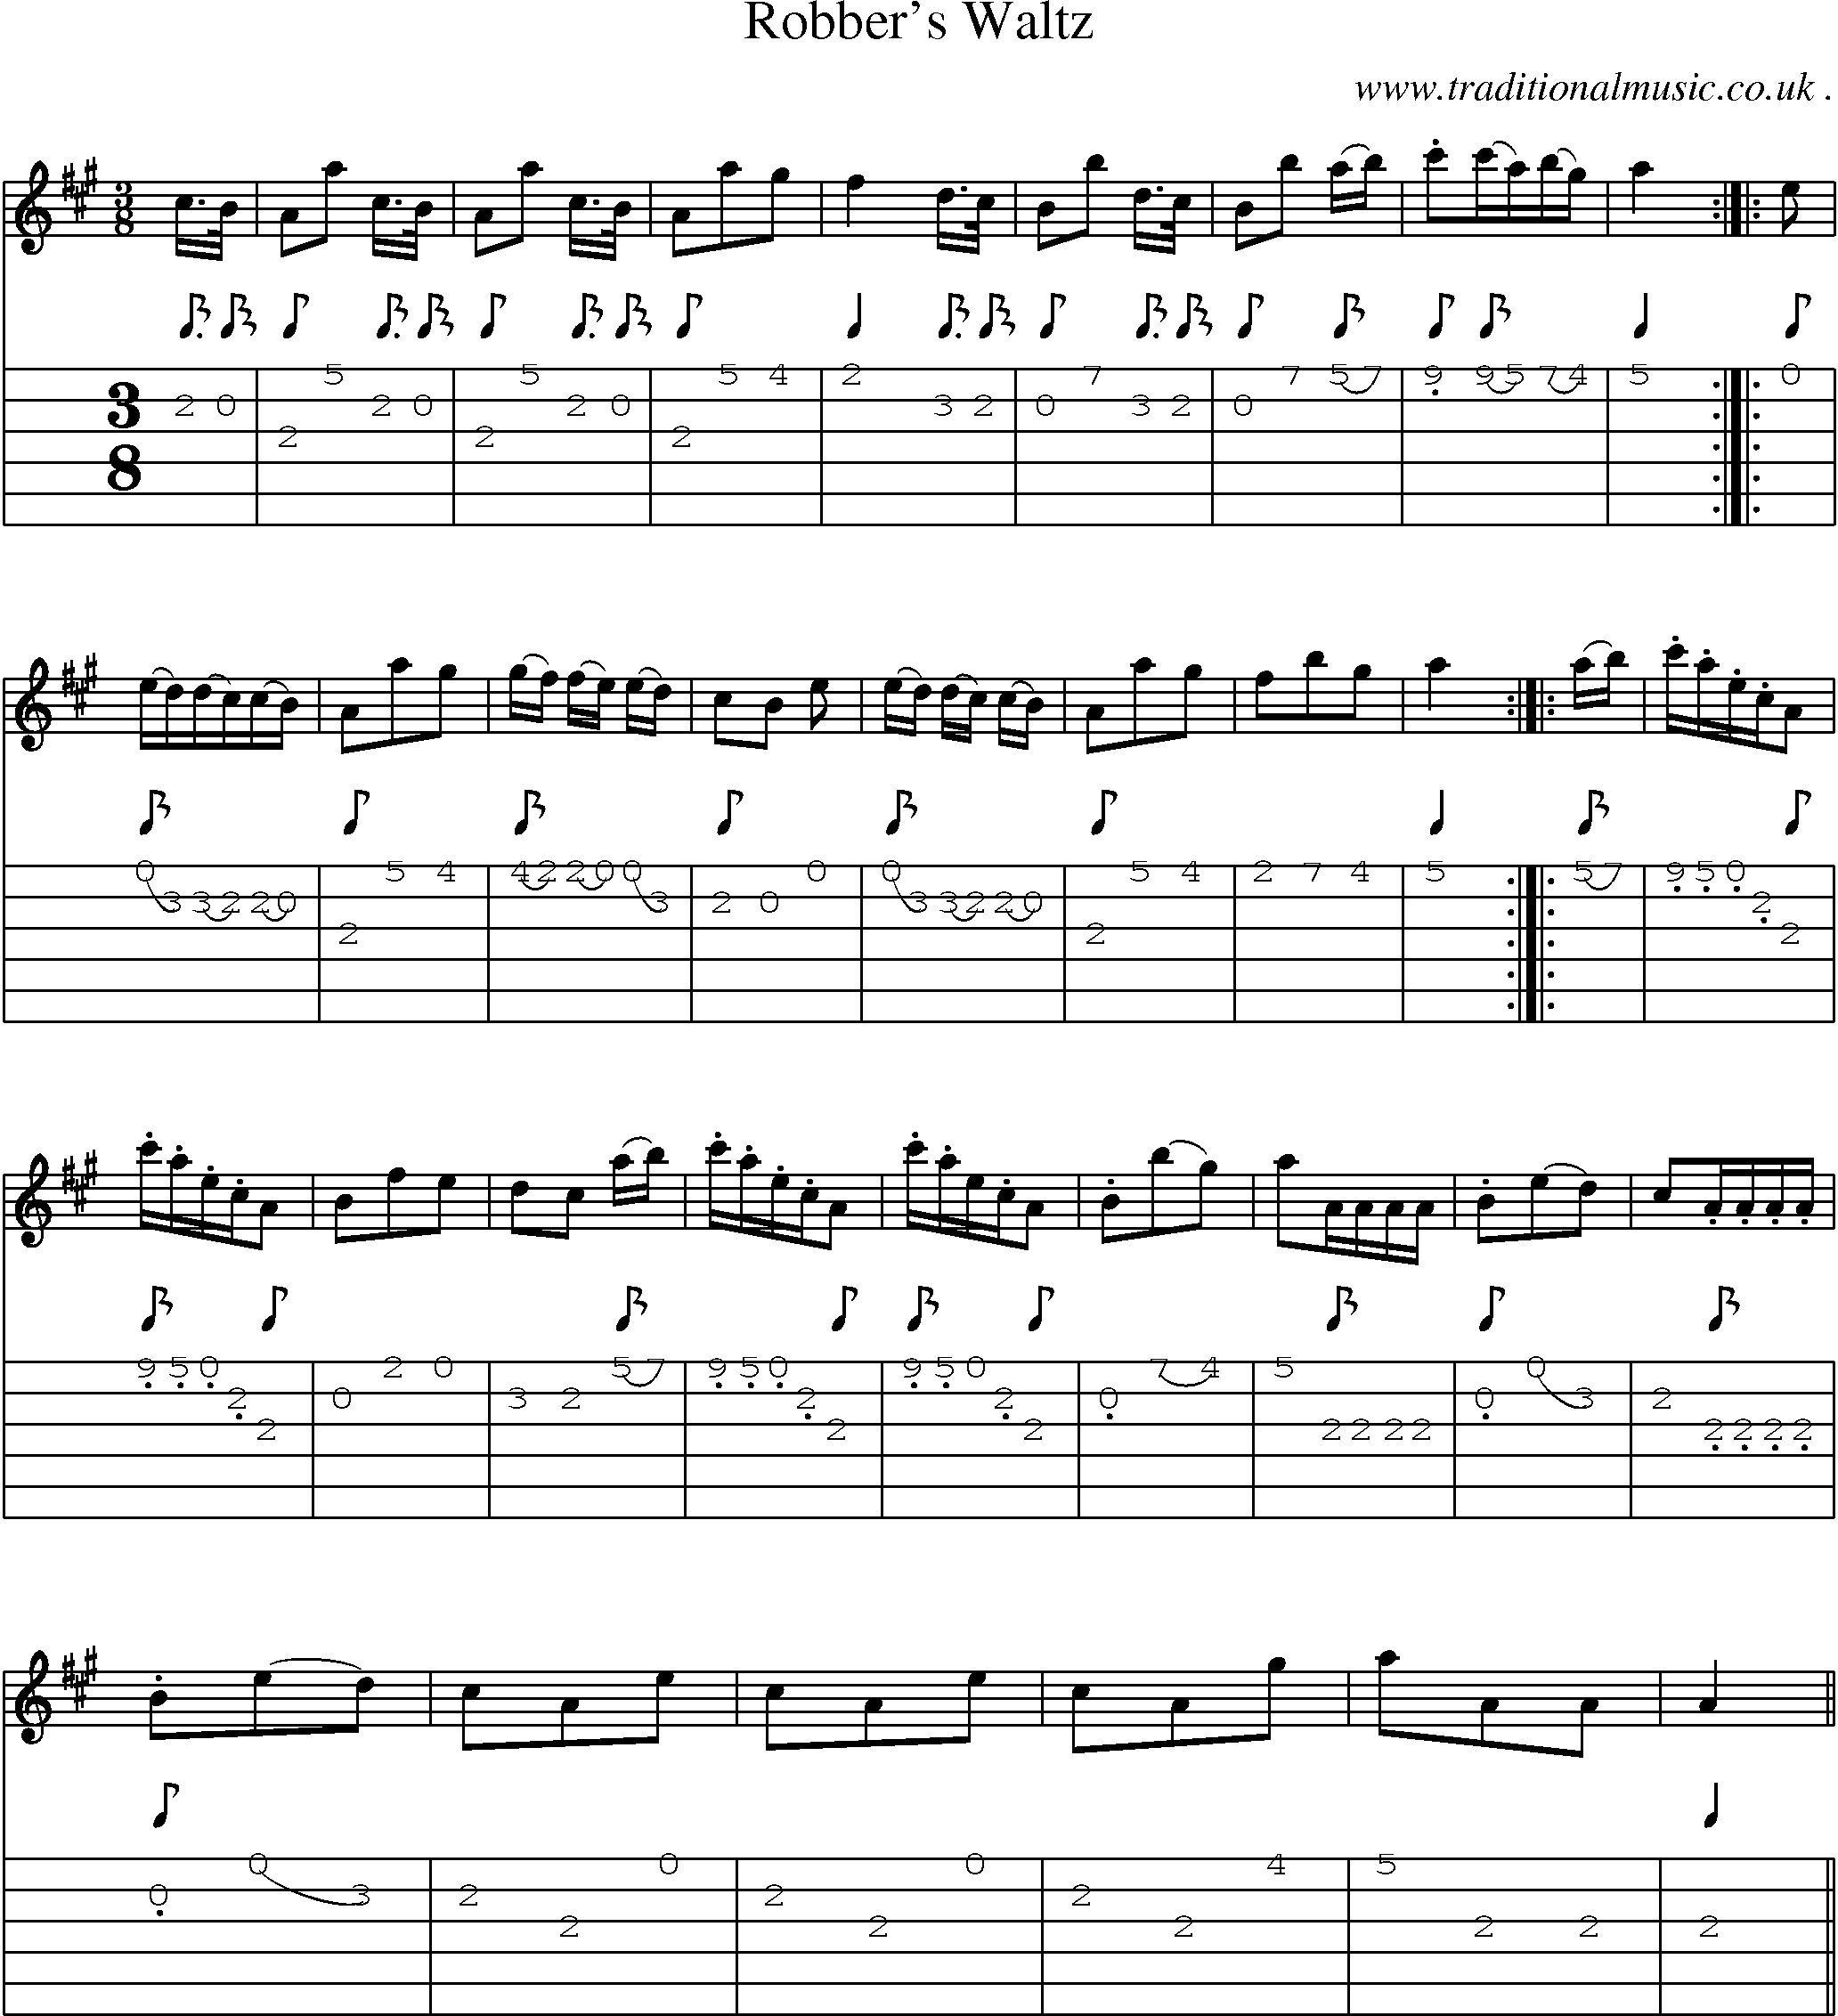 Sheet-Music and Guitar Tabs for Robbers Waltz